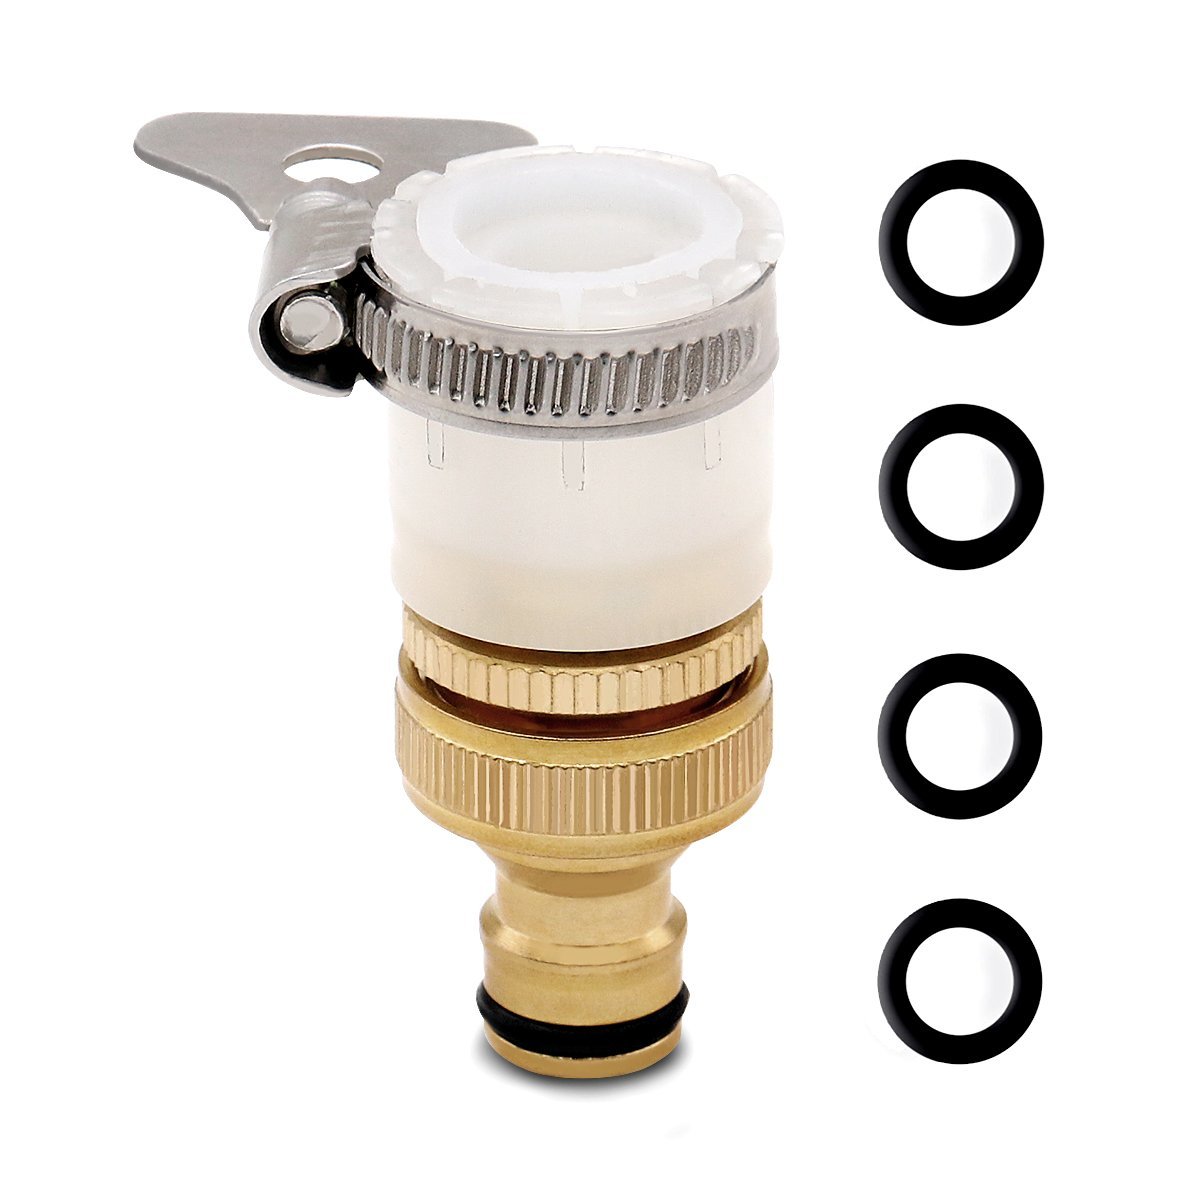 onarway Tap Connector 1/2 Inch and 3/4 Inch 2-in-1 Female Hose Connector with Free Universal Quick Connector